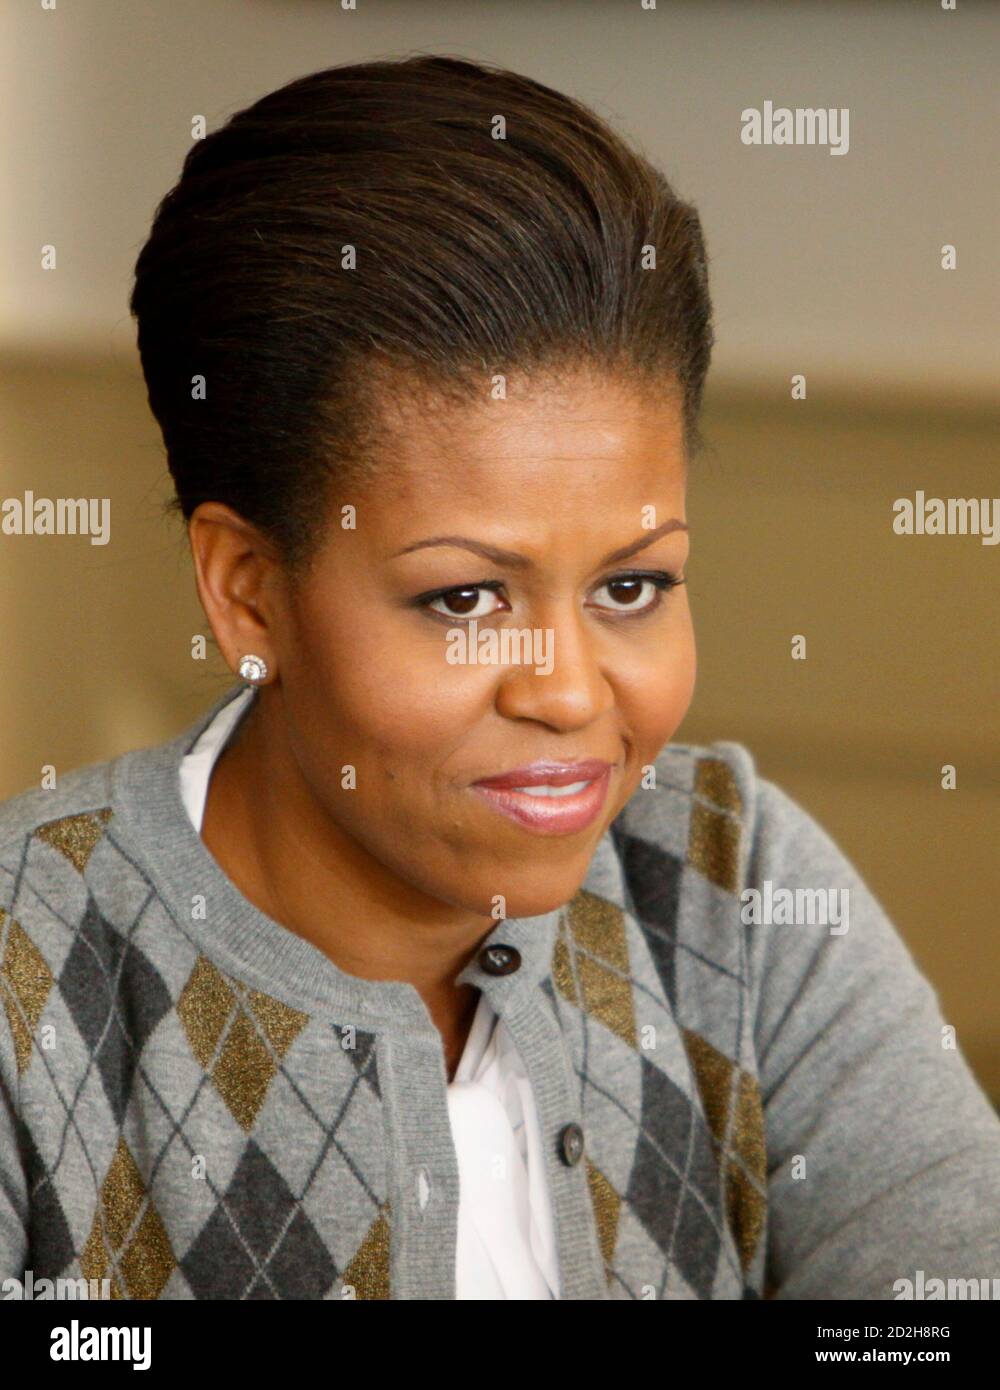 U.S. first lady Michelle Obama talks to others at her table at a Girls Mentoring Luncheon at the Governor's Mansion in Denver, Colorado November 16, 2009. REUTERS/Rick Wilking (UNITED STATES POLITICS EDUCATION HEADSHOT) Stock Photo